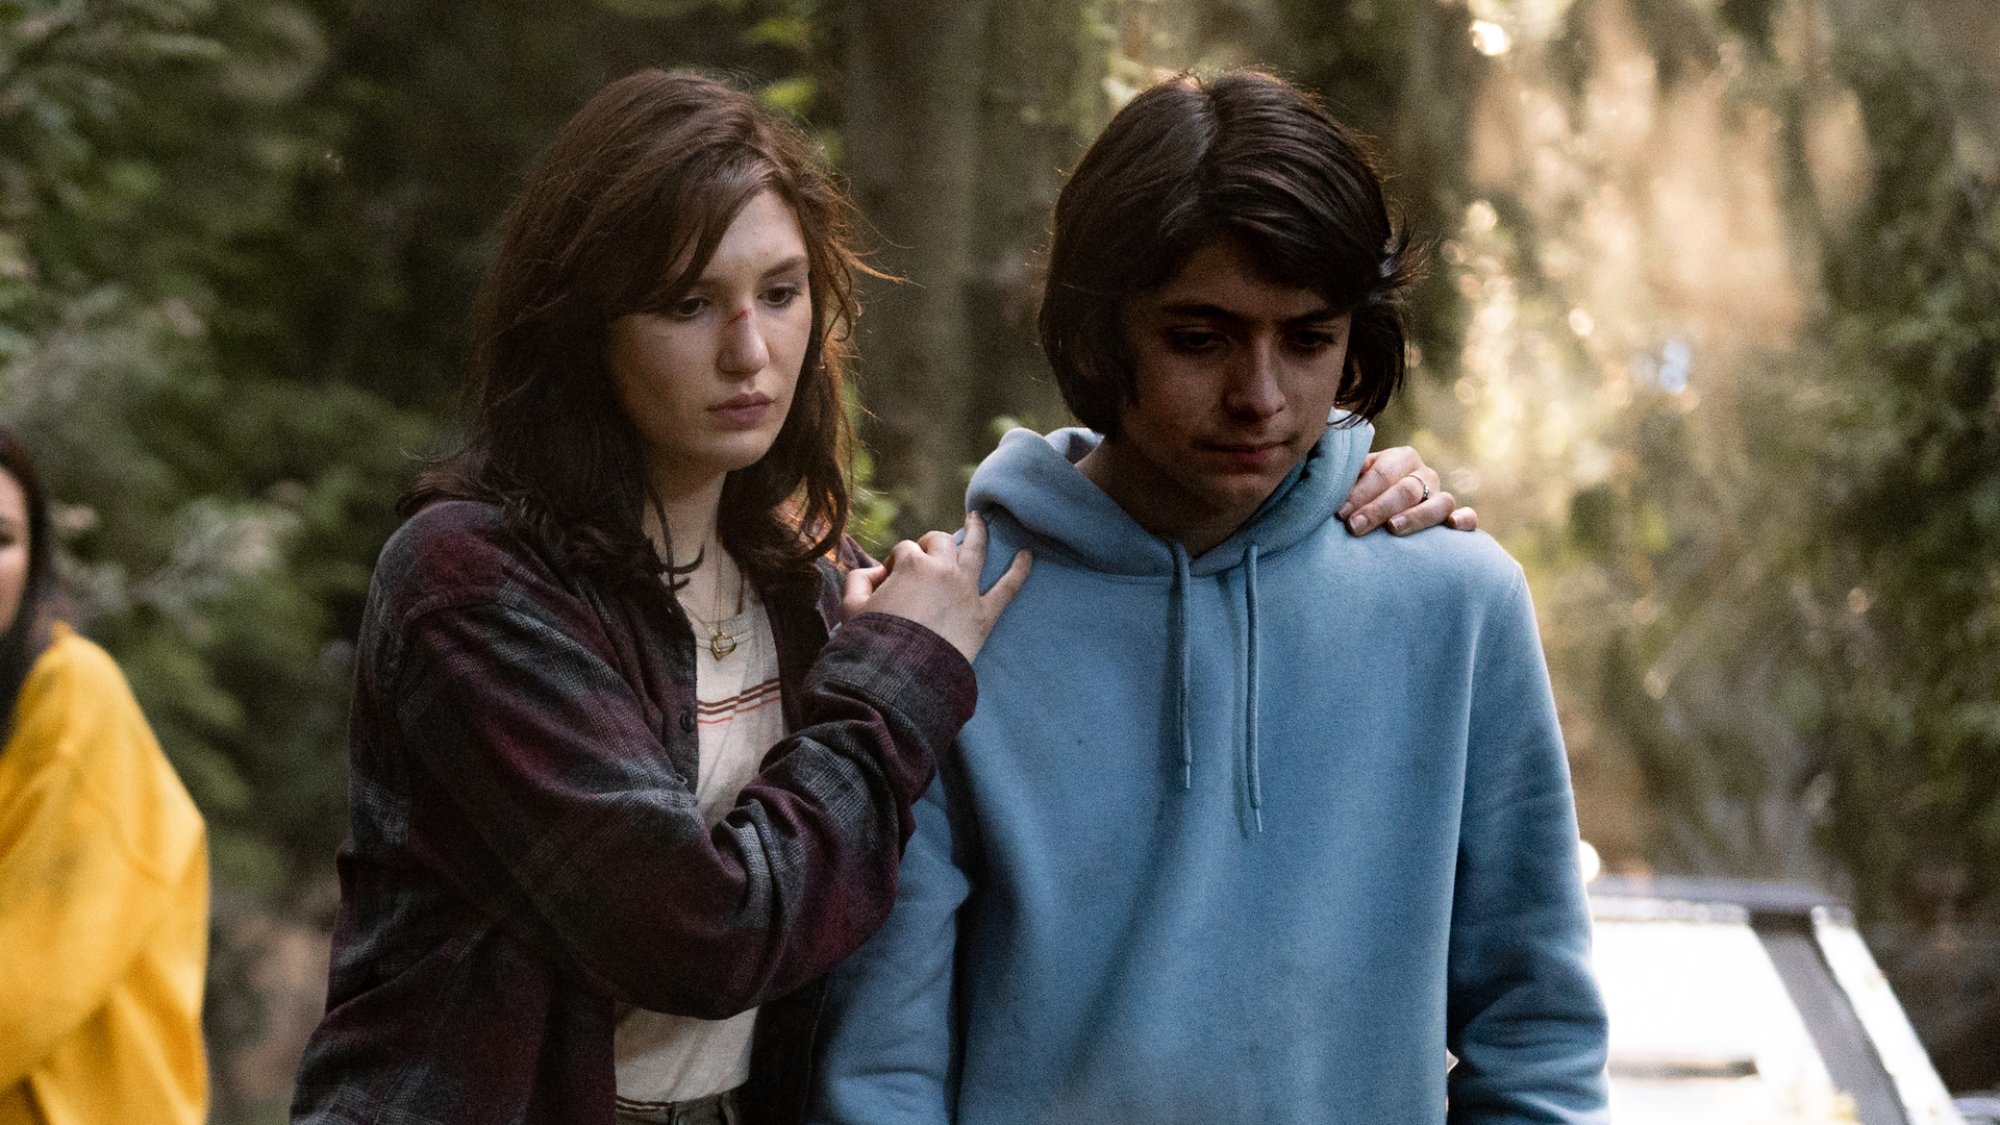 A teen girl holds a teen boy by the shoulders in the woods, both look solemn.